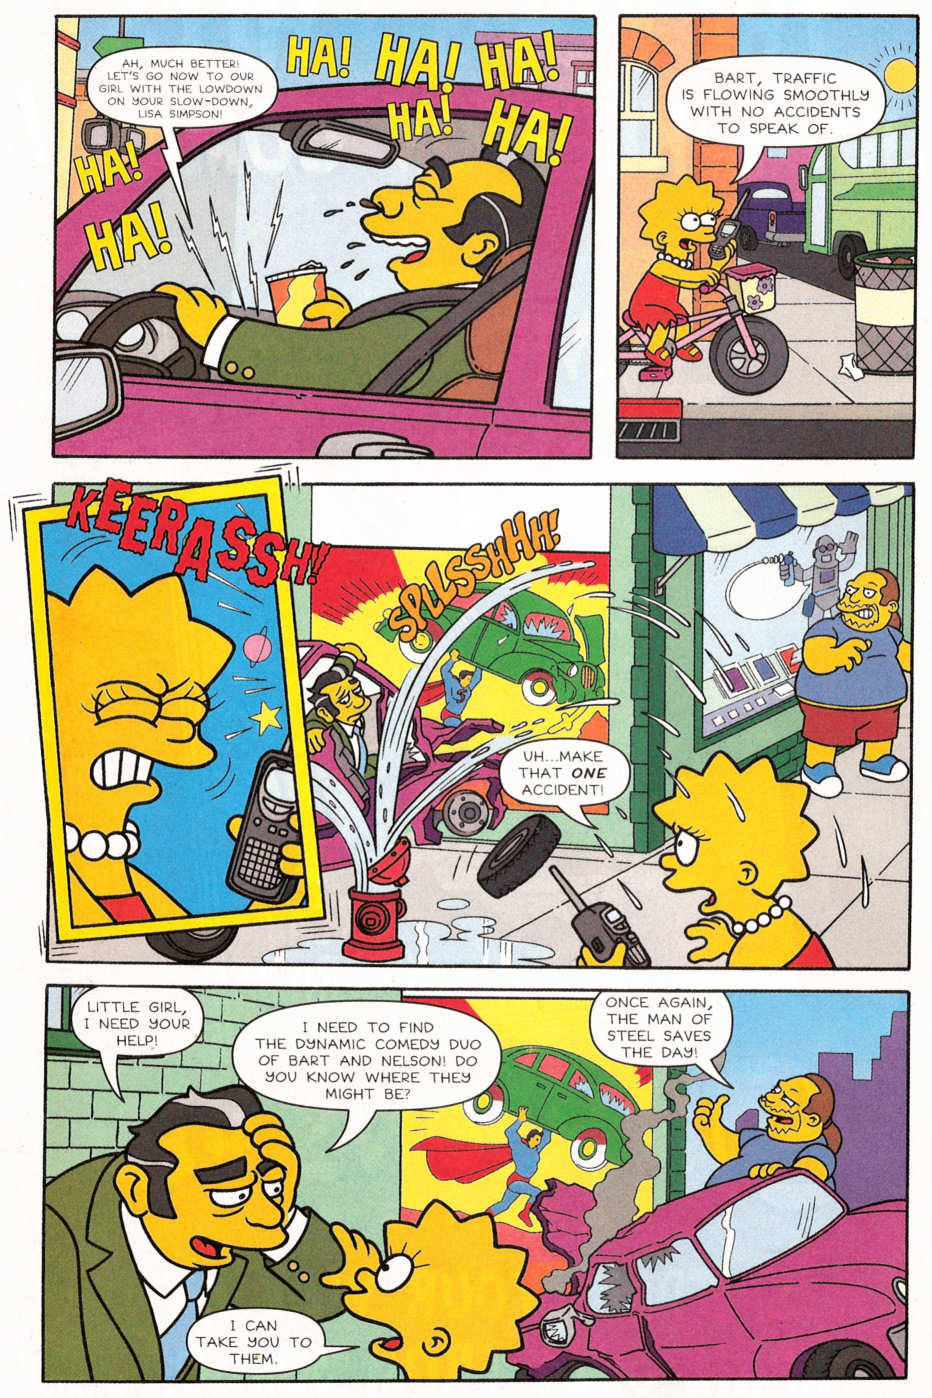 Read online Bart Simpson comic -  Issue #29 - 19